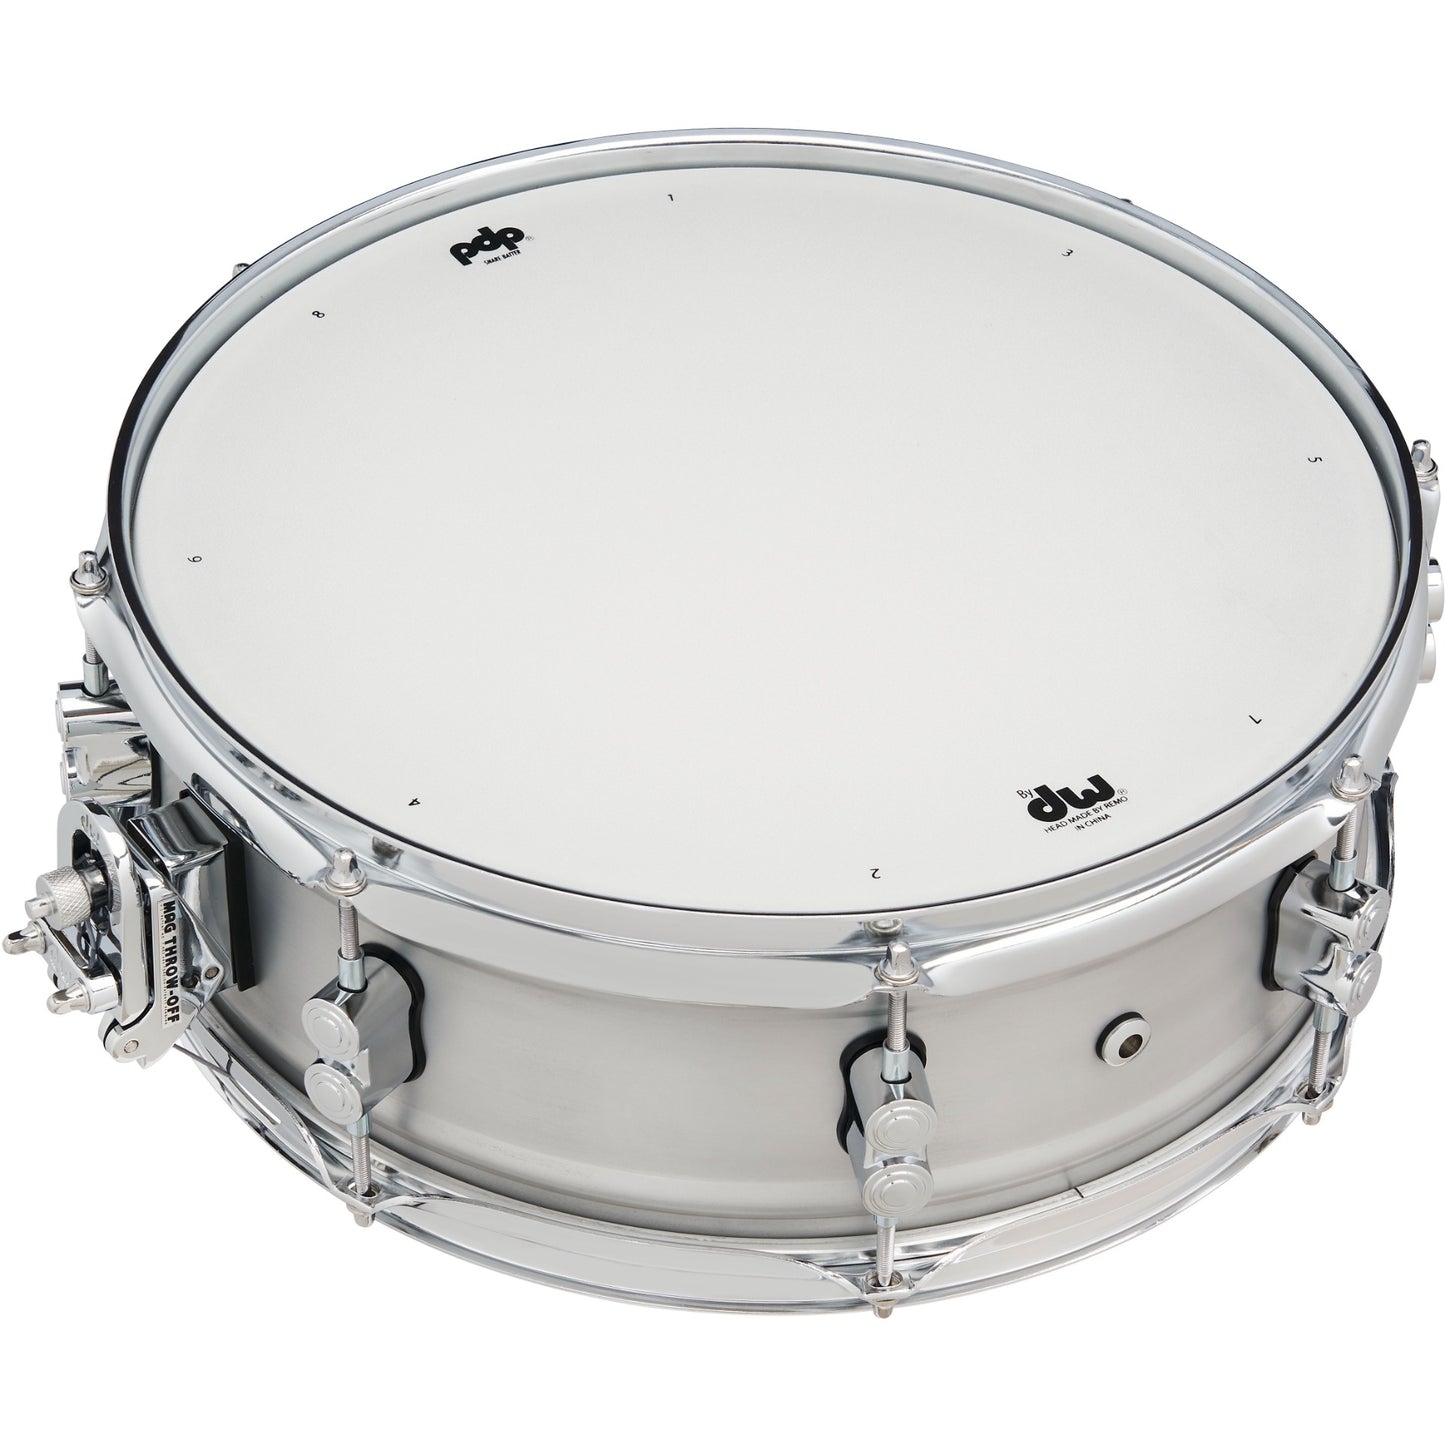 Pacific Drums & Percussion Concept Series 5x14 in 1mm Aluminum Snare Drum